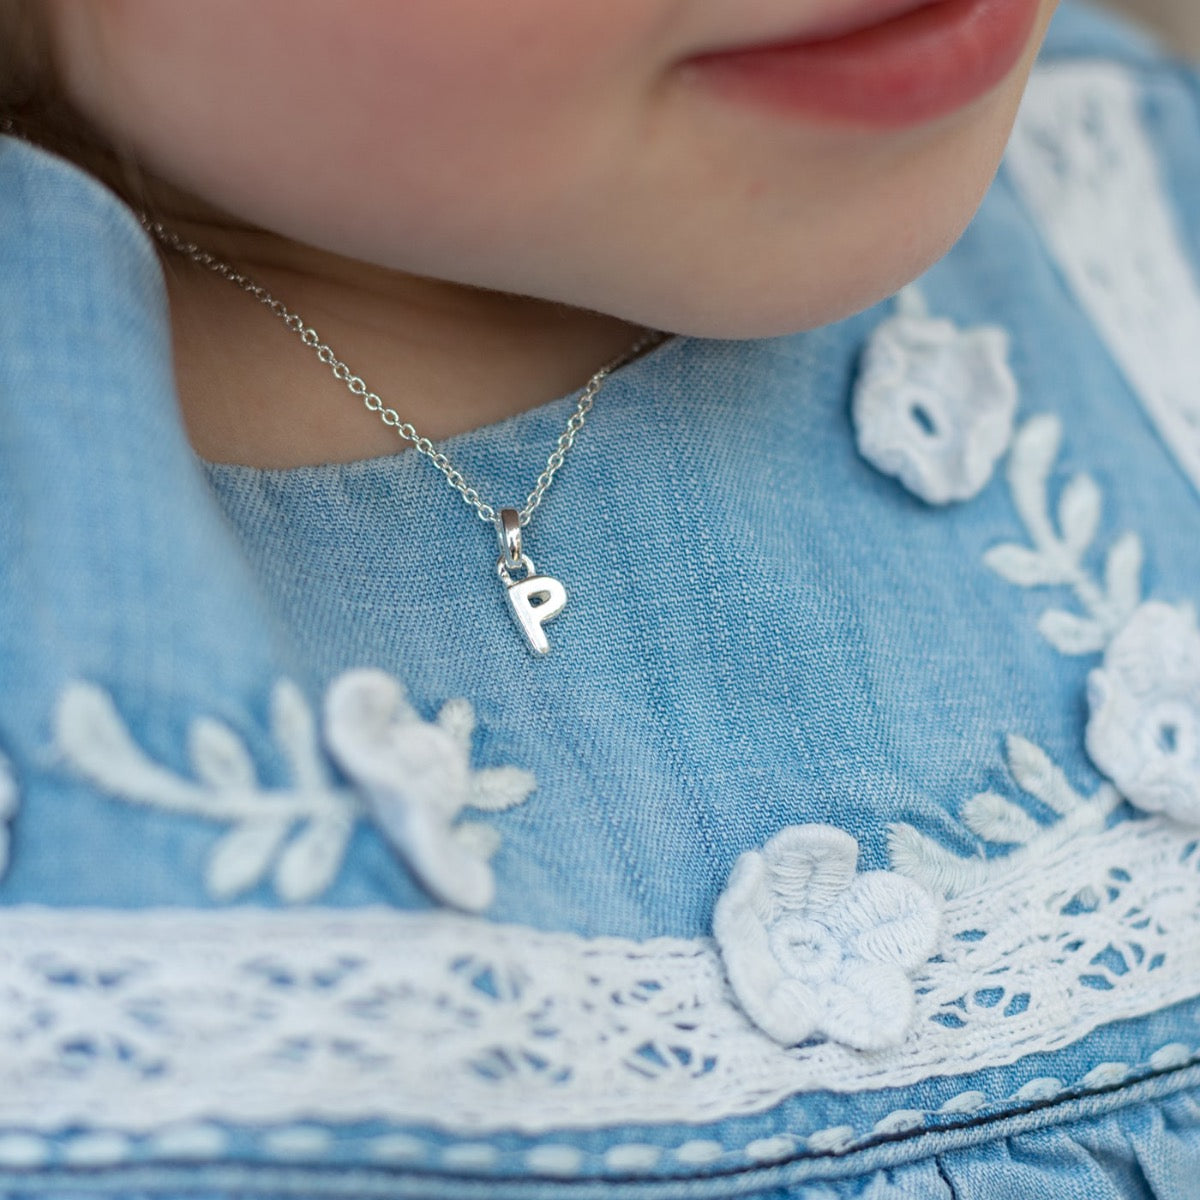 Silver letter P necklace worn